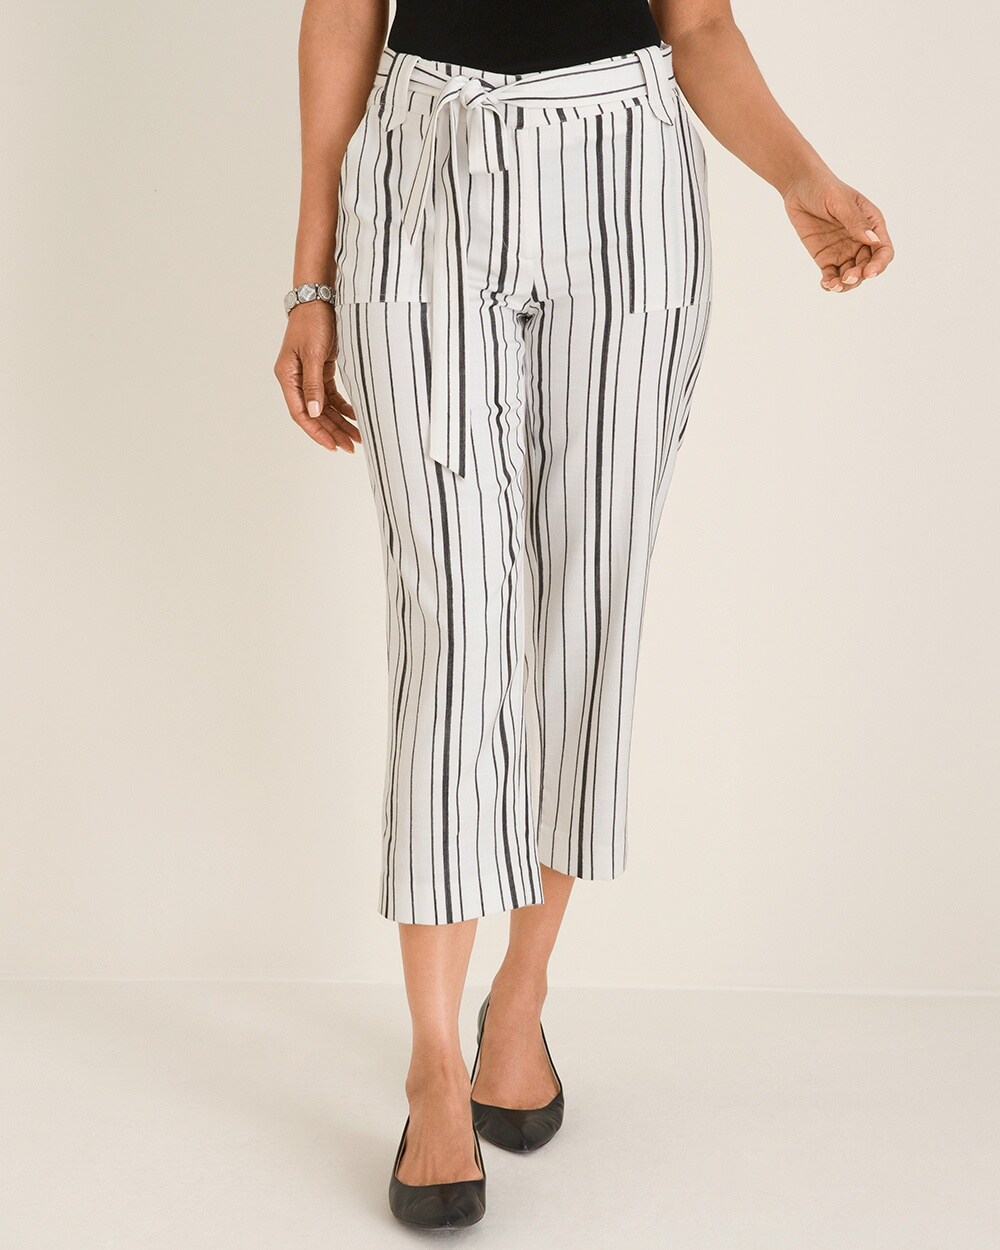 Belted Striped Crops